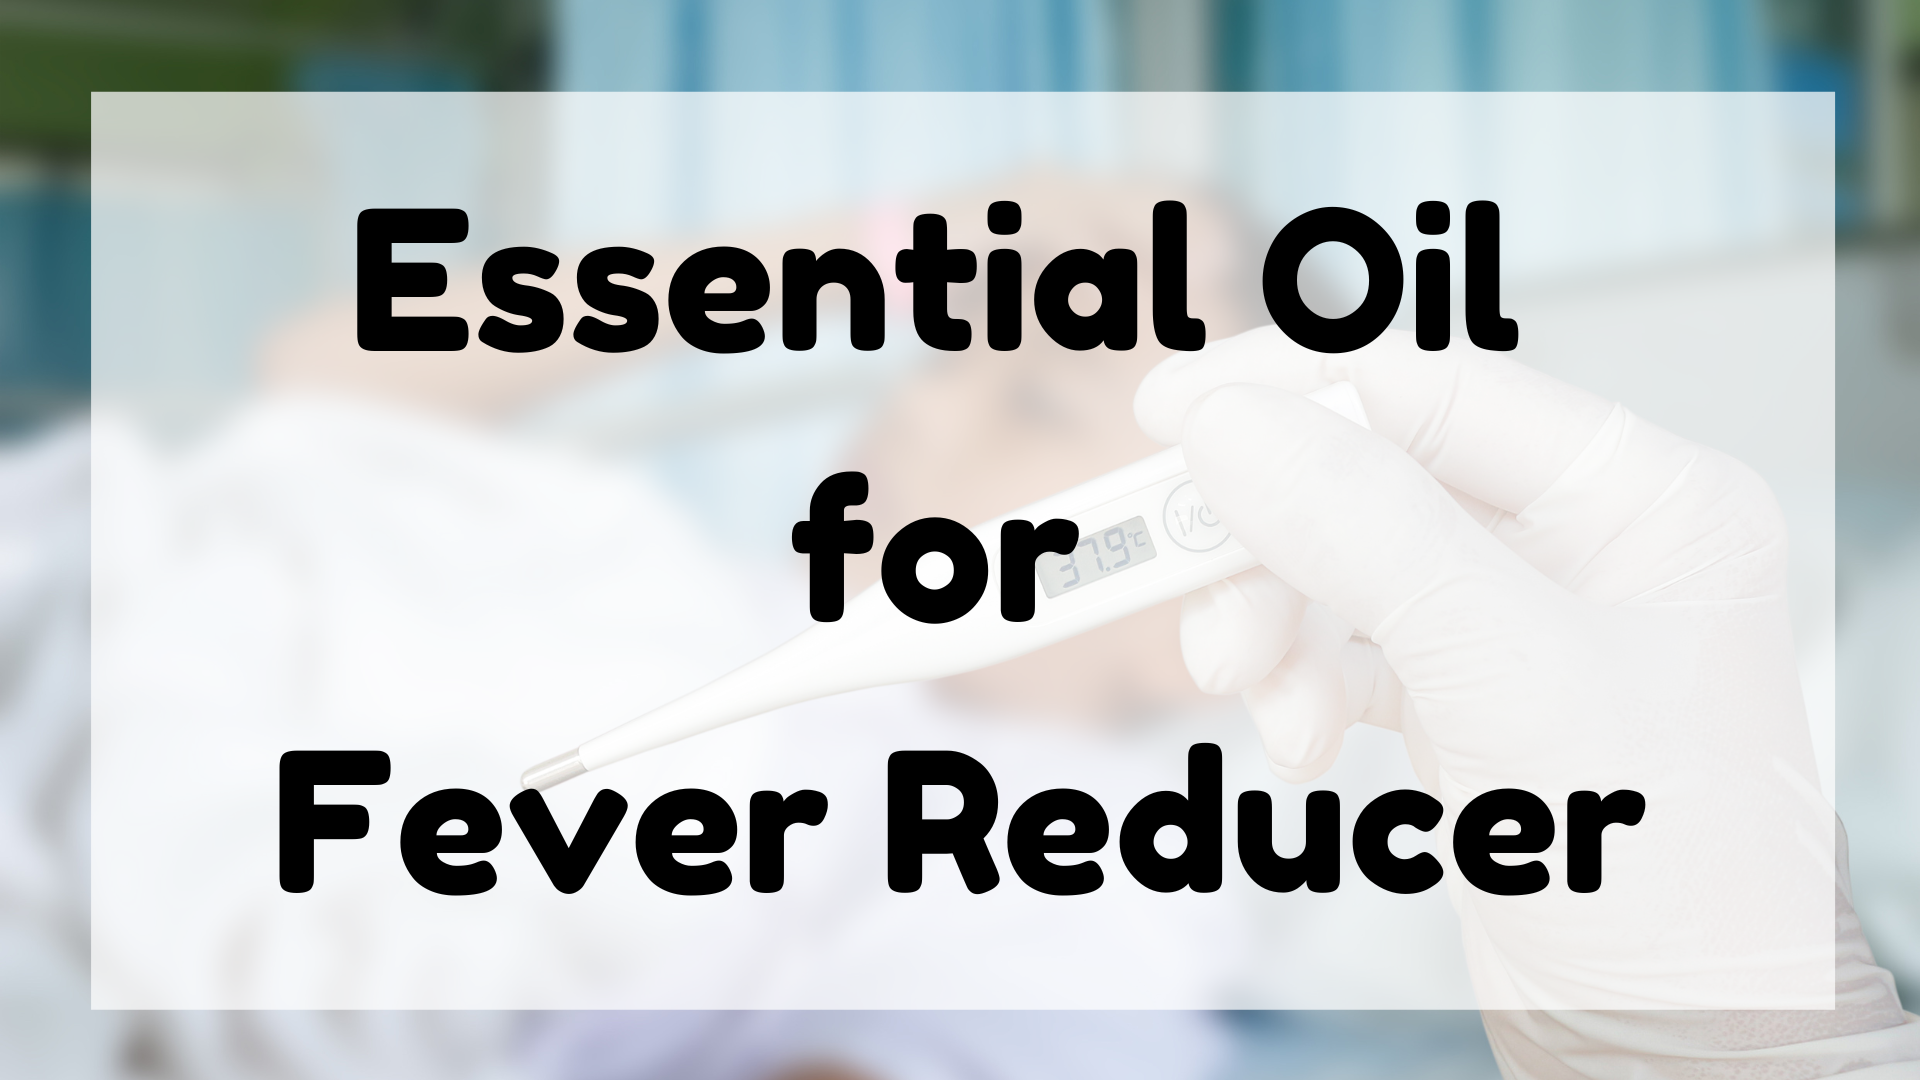 Essential Oil for Fever Reducer featured image